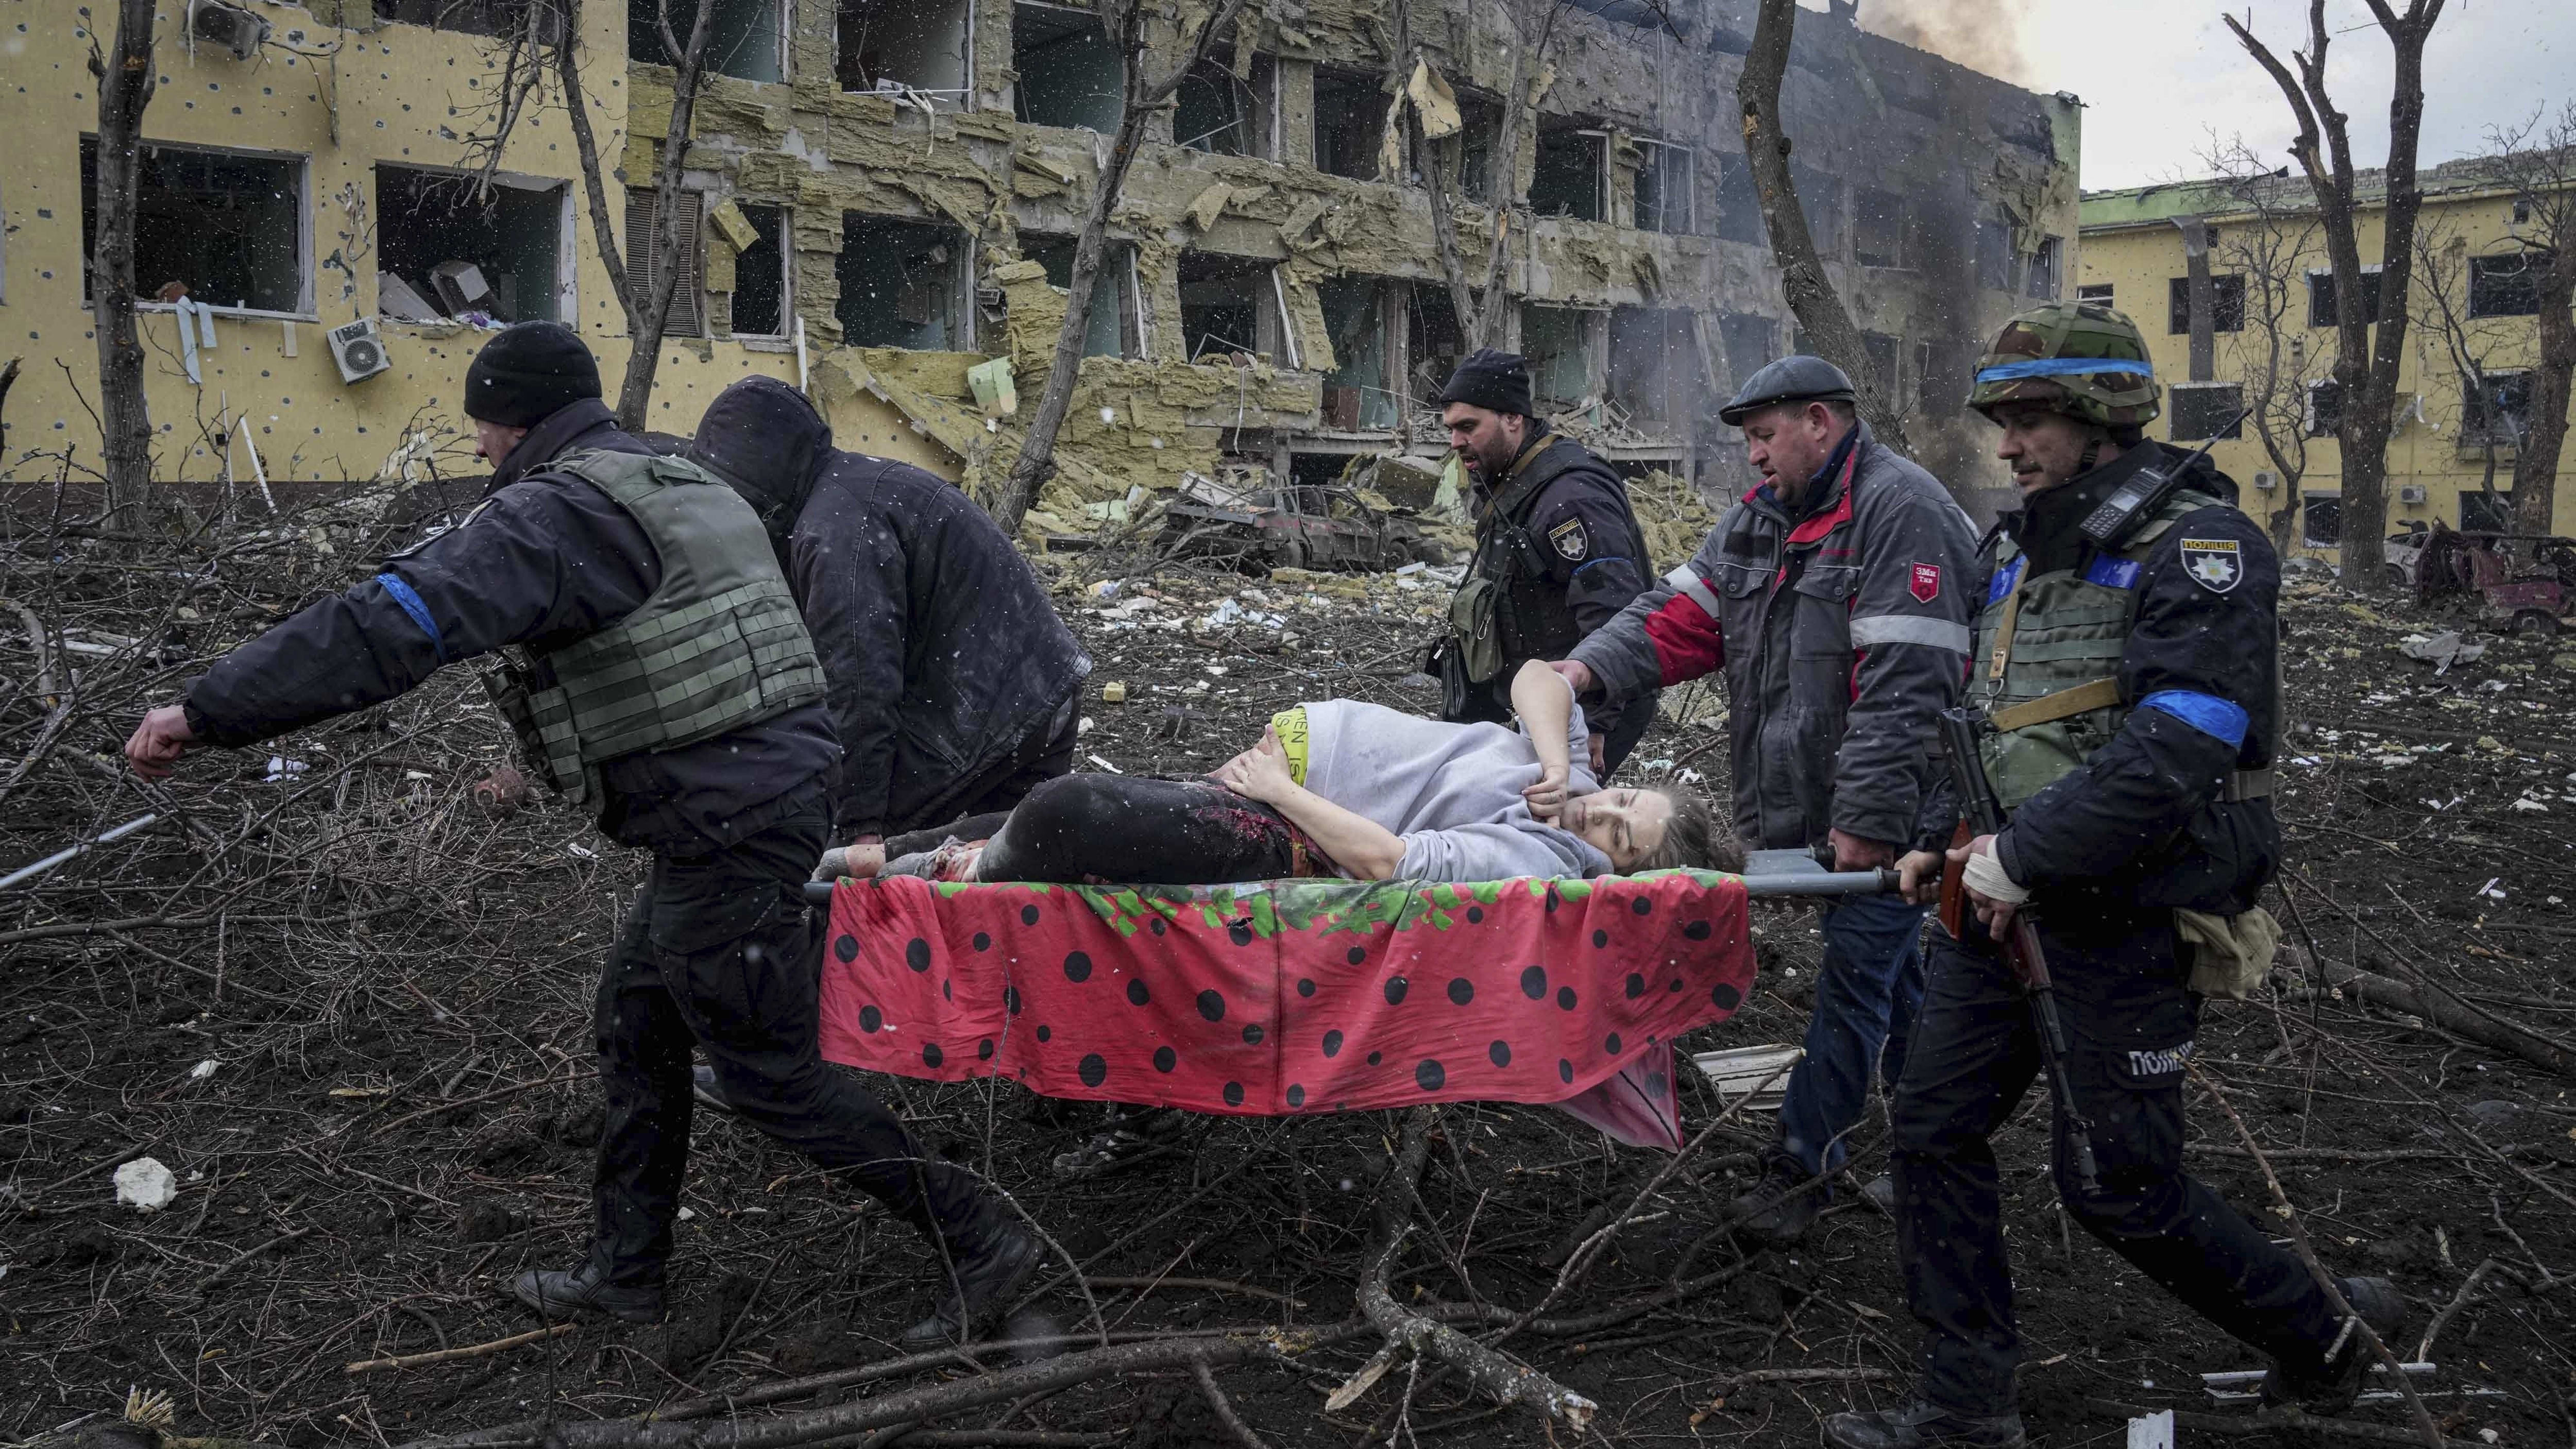 A pregnant woman is evacuated from a maternity hospital that was shelled Wednesday in Ukraine.